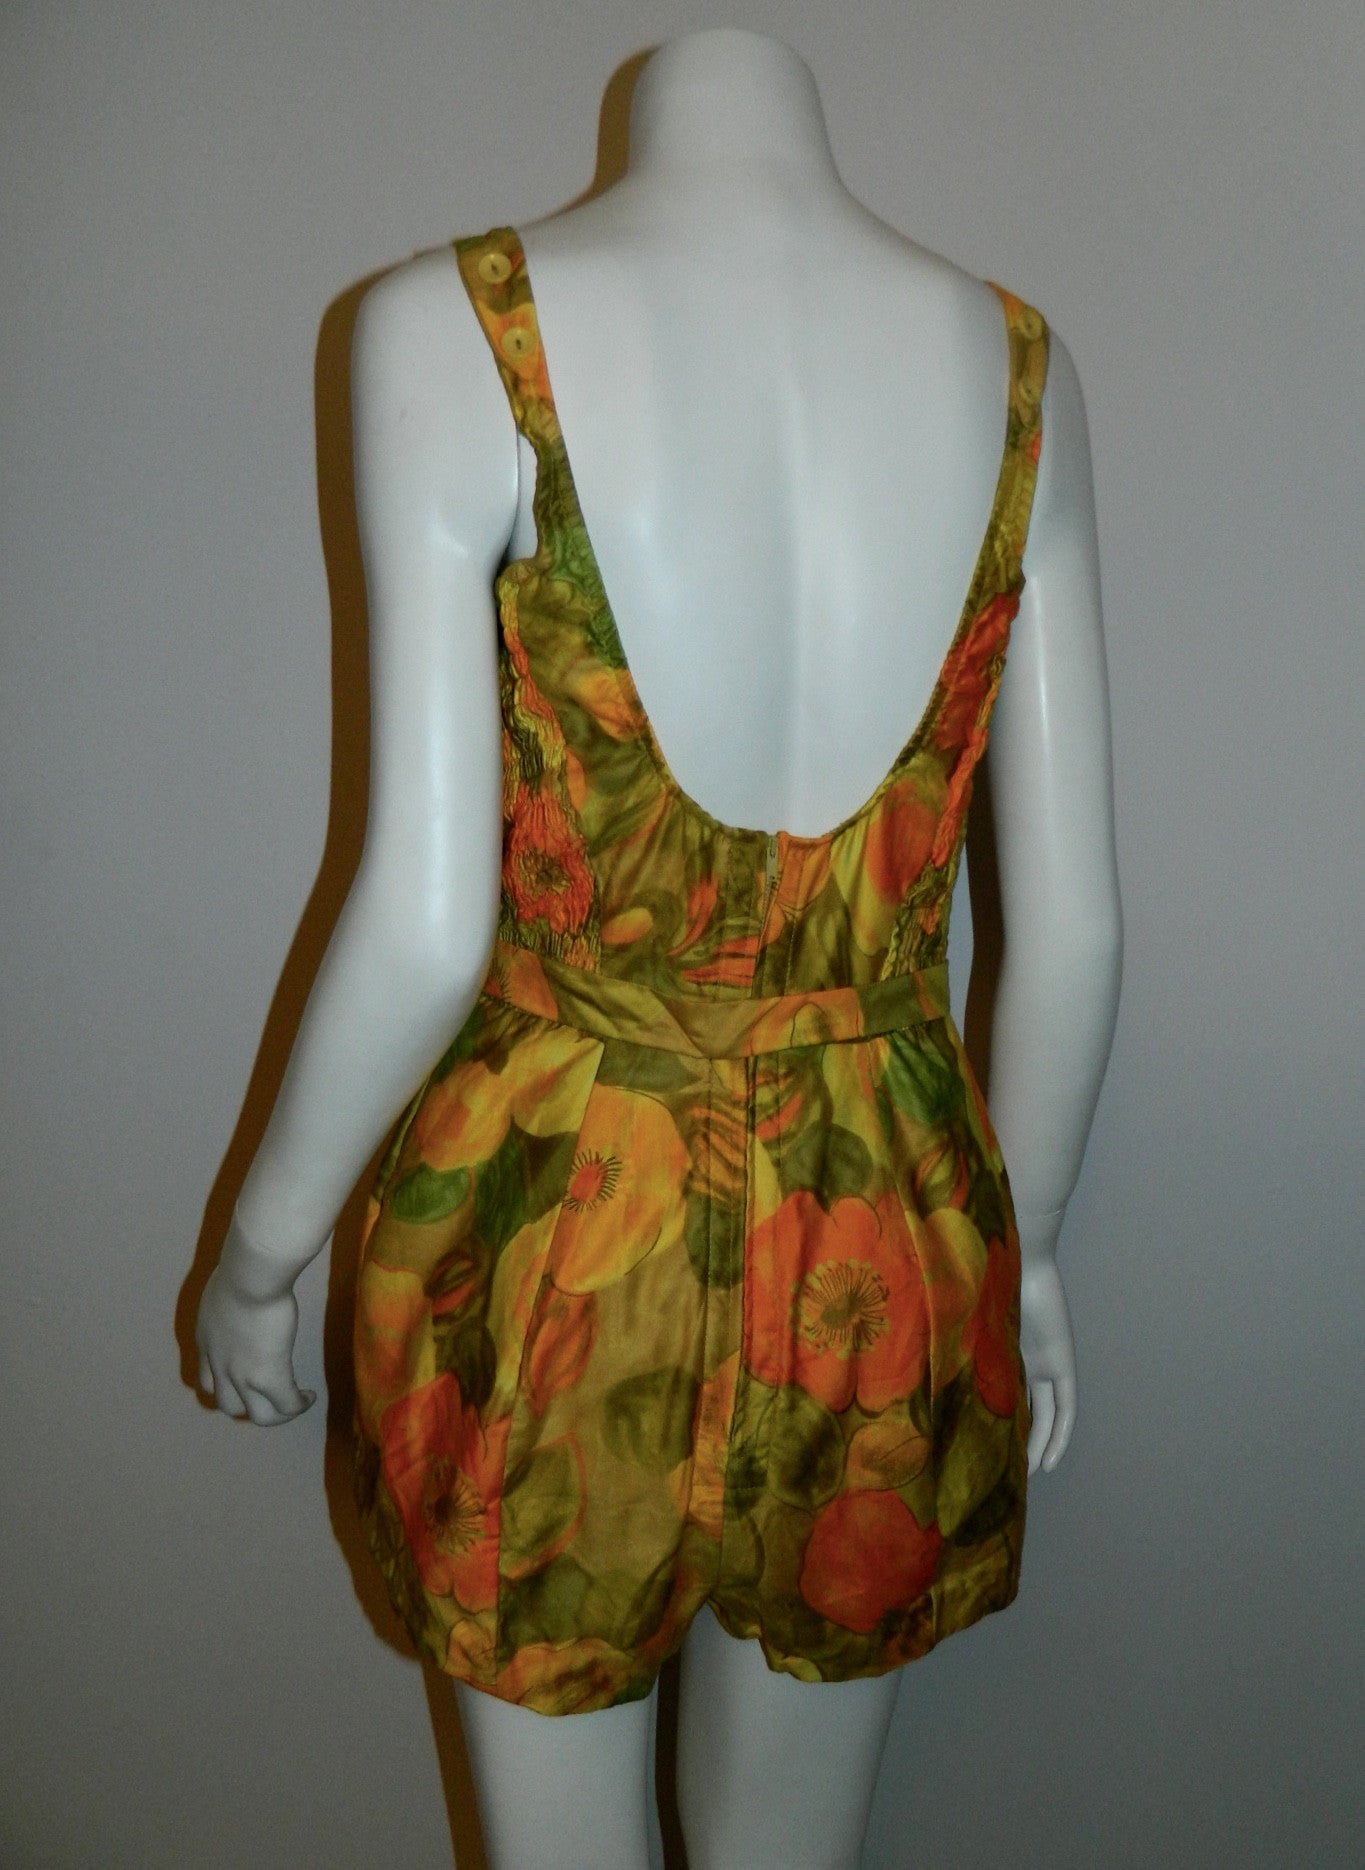 vintage 1960s floral ROMPER swimsuit / Sea Stars Sears bathing suit playsuit New With Tags 38